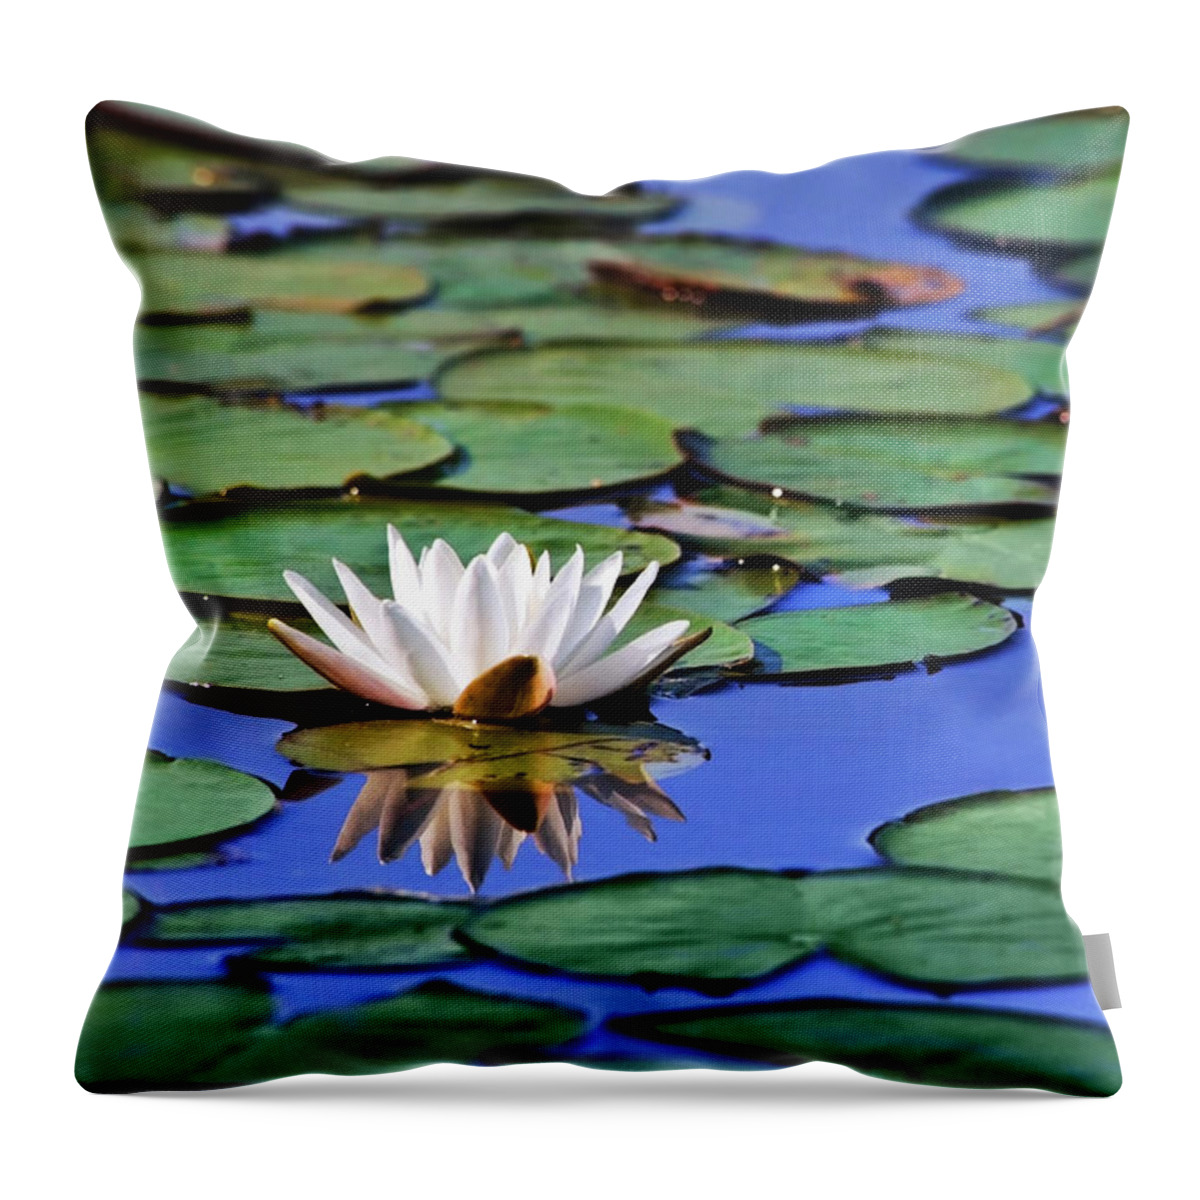 Water Lily Throw Pillow featuring the photograph Tropical Water Lily by Christina Rollo